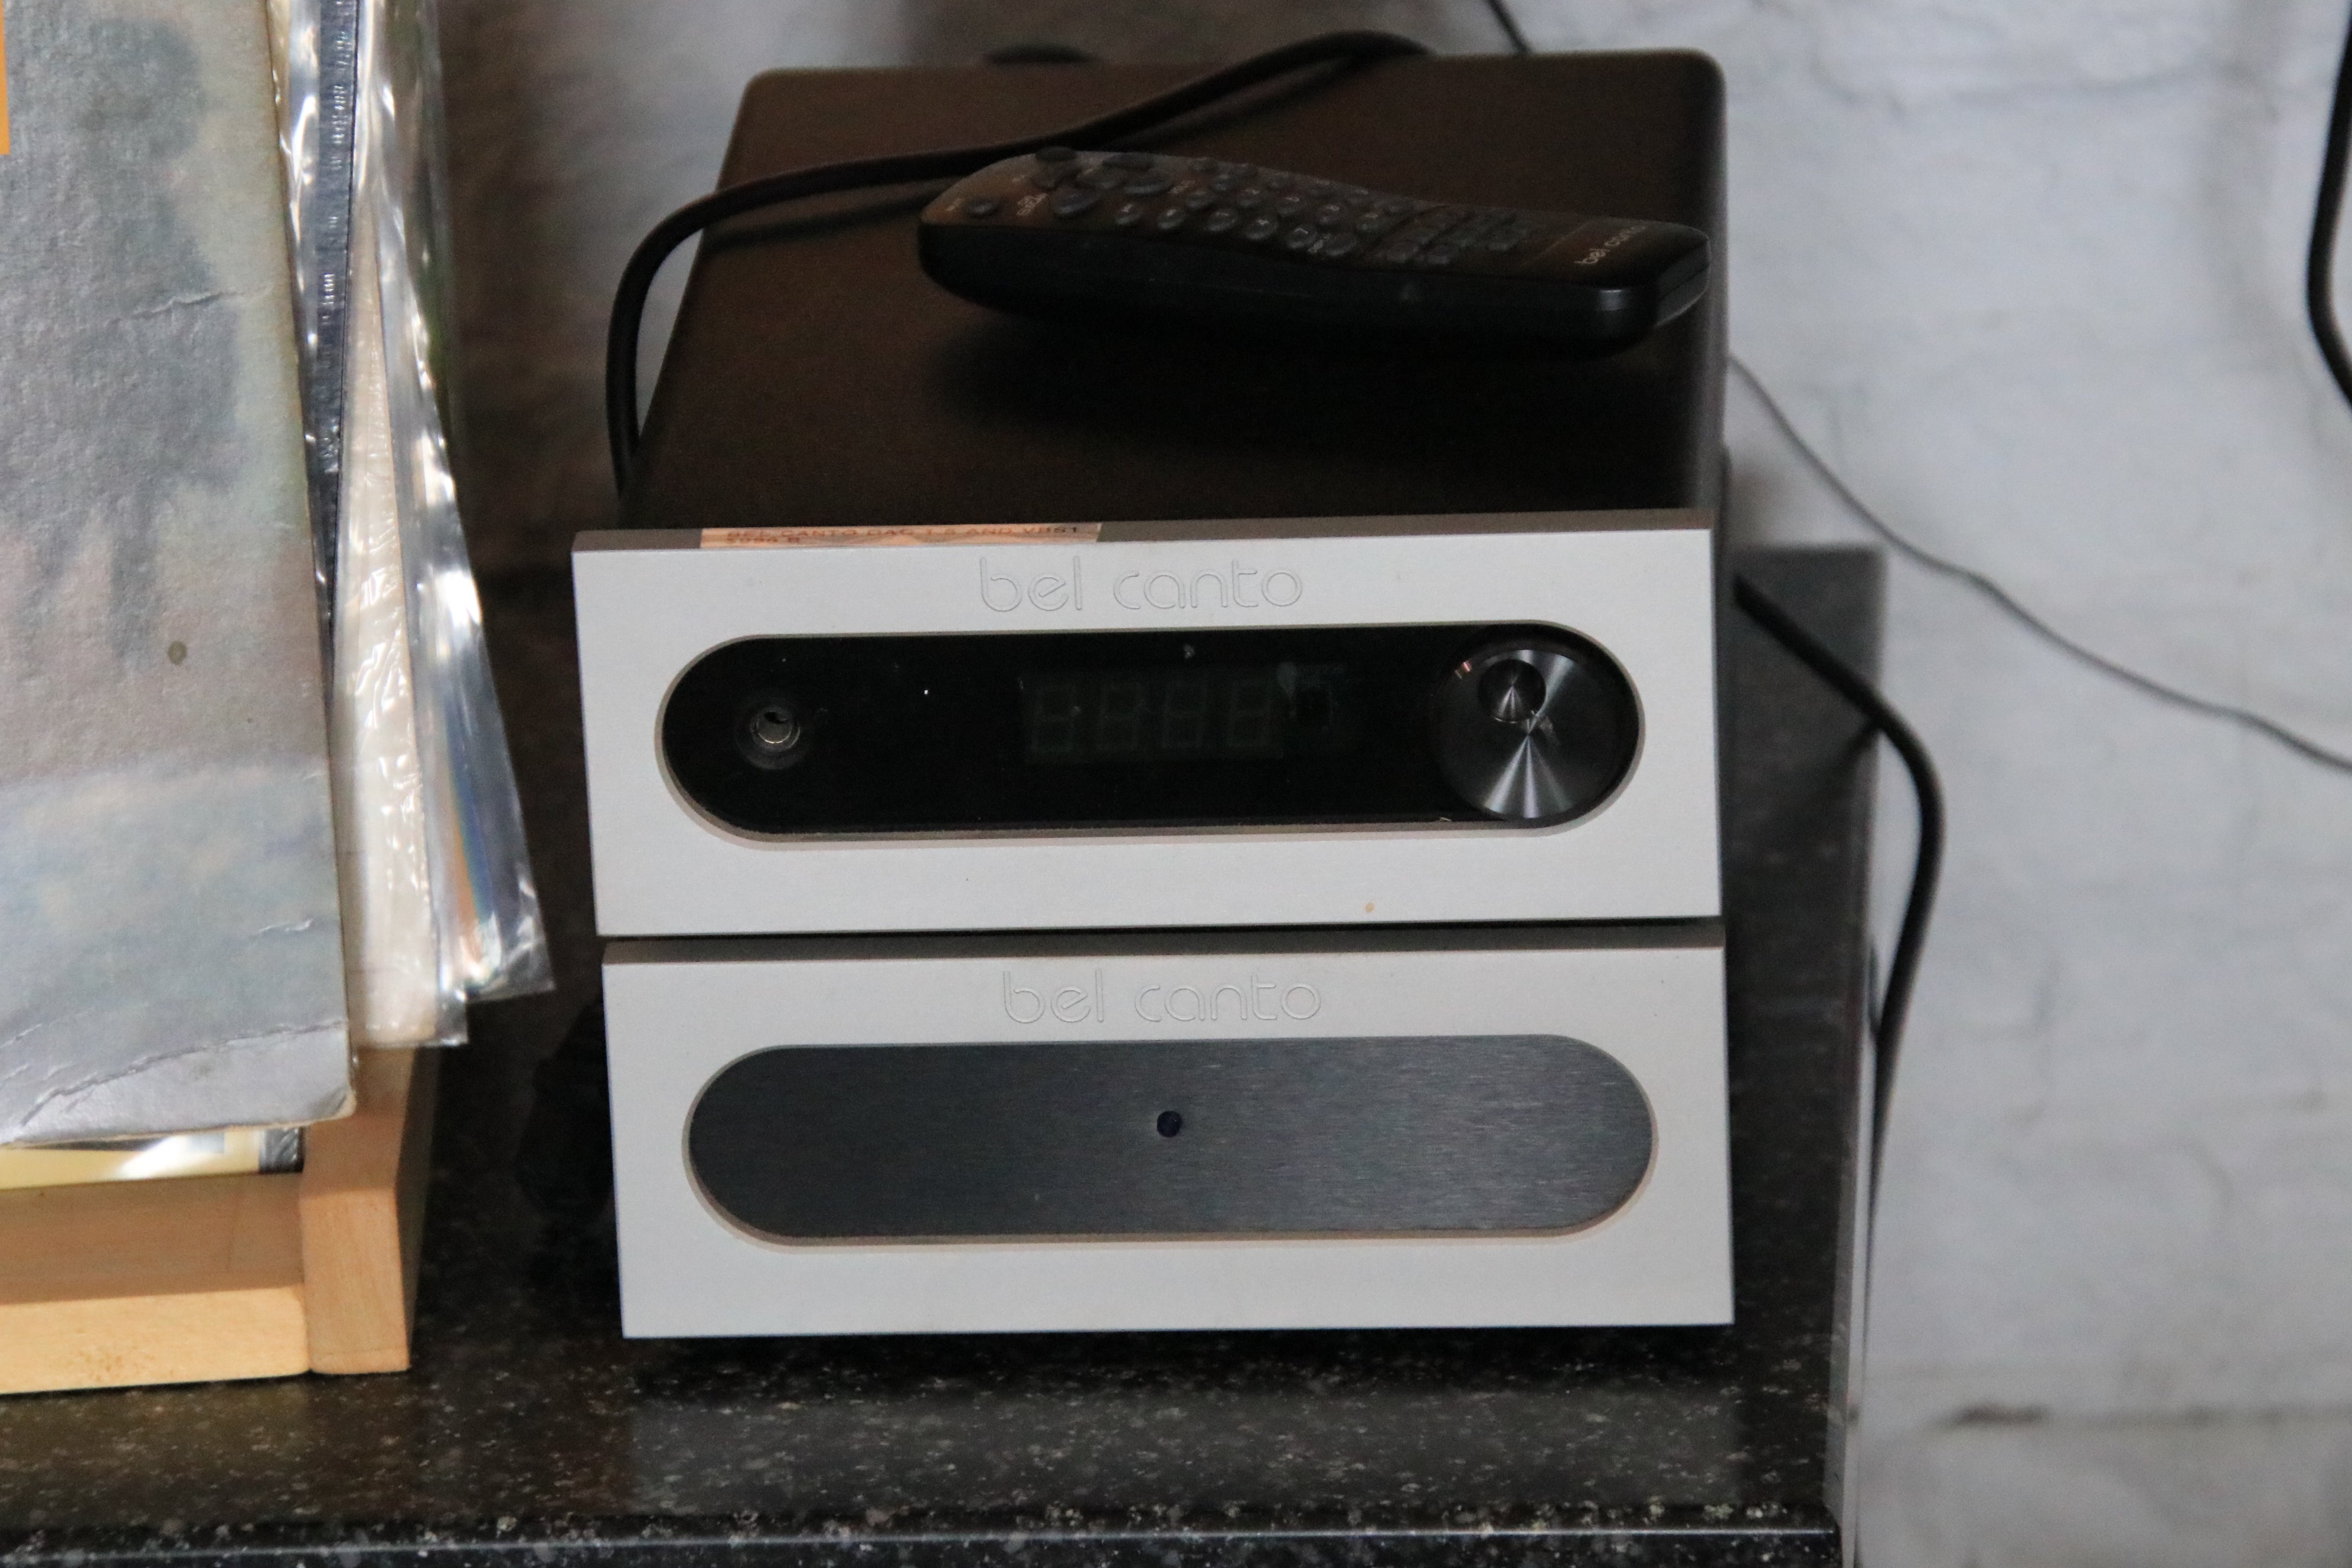 Bel Canto DAC 1.5 and VBS1 - $998